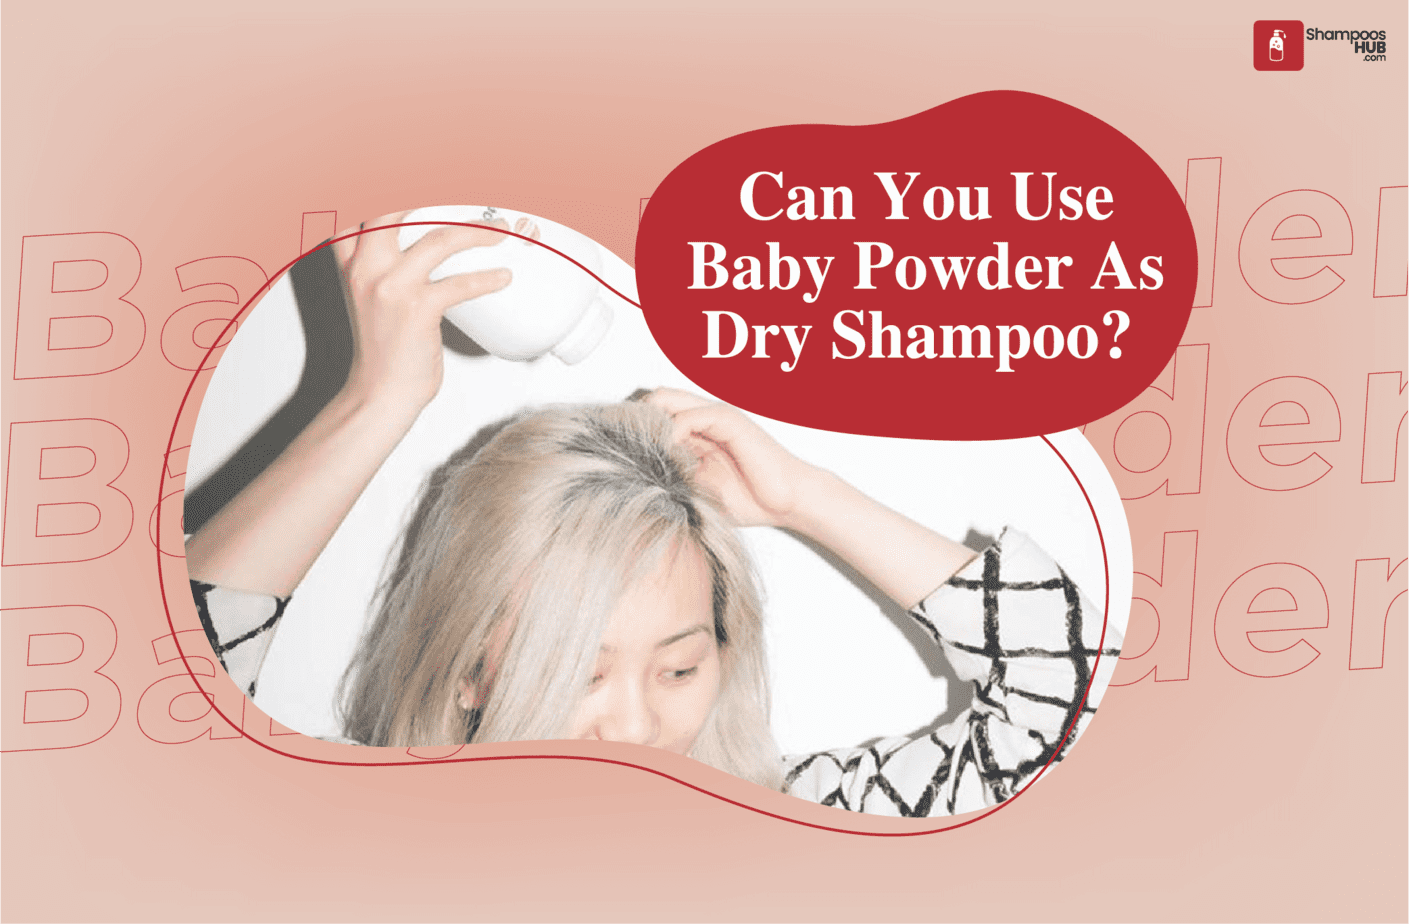 Can You Use Baby Powder As Dry Shampoo?